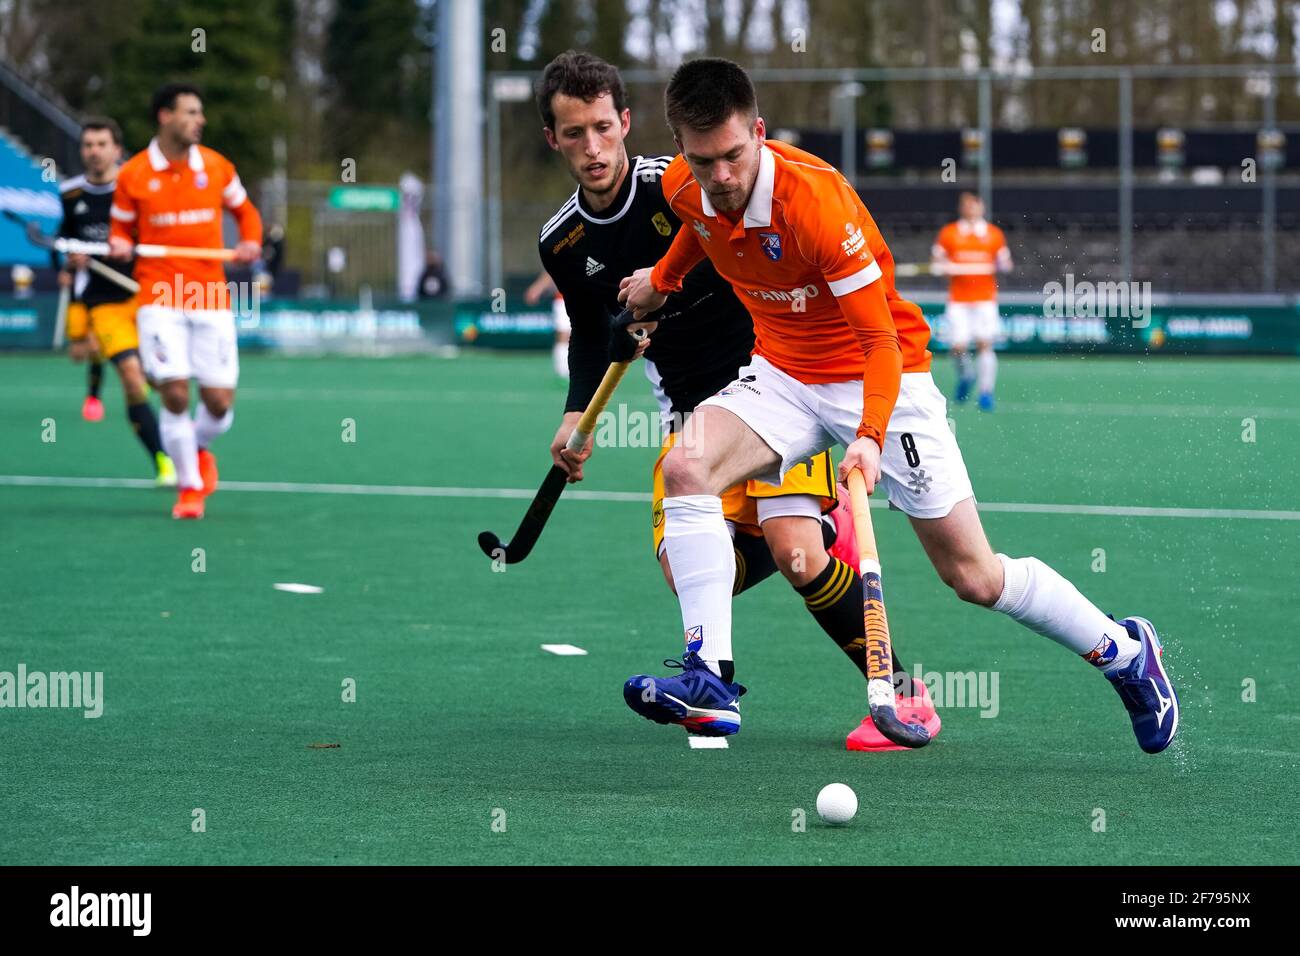 AMSTELVEEN, NETHERLANDS - APRIL 5: Ignasi Torras of Atletic Terrassa HC and Thierry Brinkman of Bloemendaal during the Euro Hockey League Final match Stock Photo